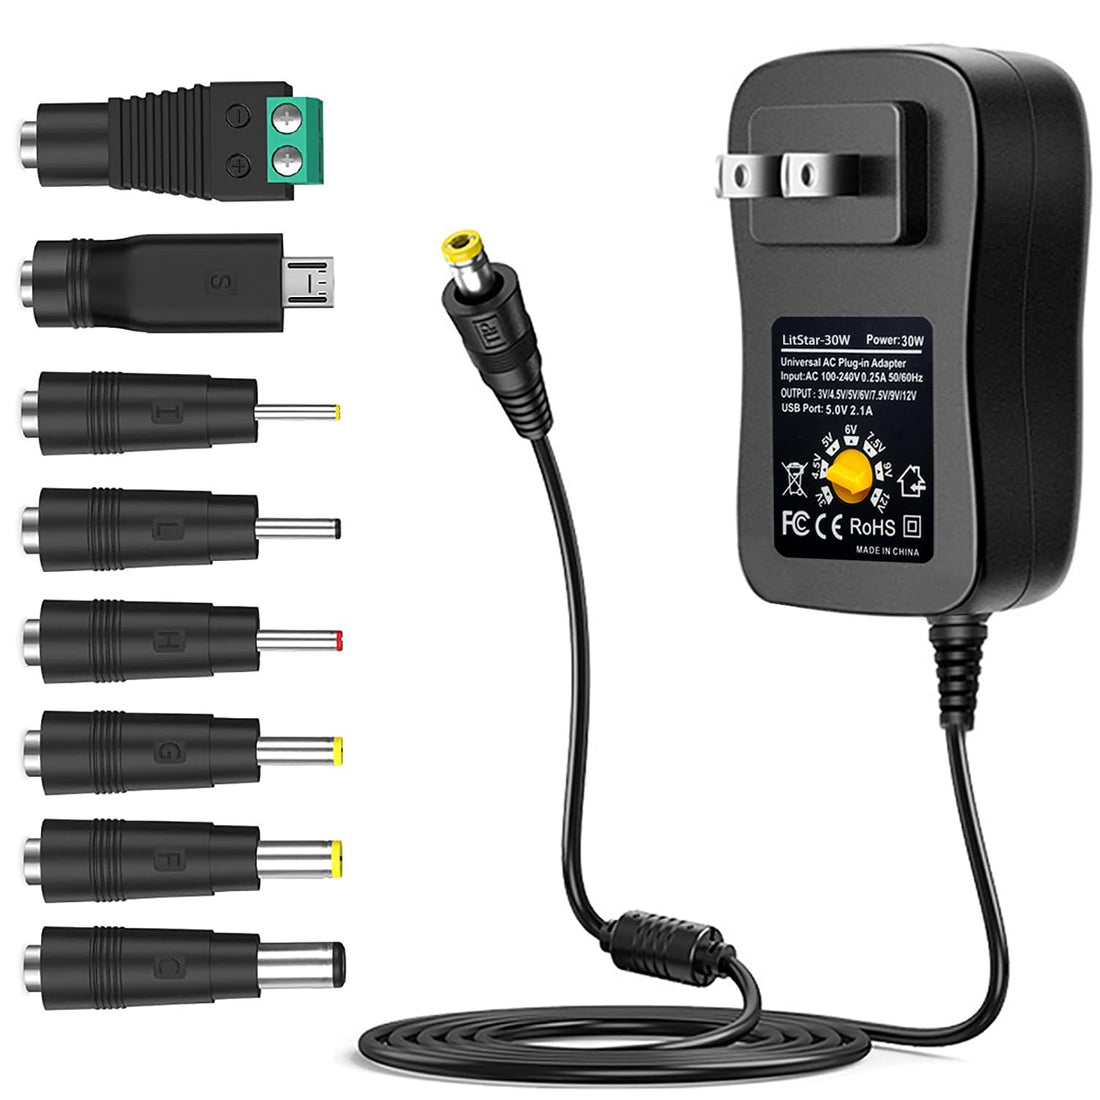 AC DC Adapter Power Supply 2A 12V 9V 7.5V 6V 5V 4.5V 3V Universal Charger 3 Volt to 12 Volt 100mA ~ 2000mA 30W Max, with 8 Selectable Plug Tip for Household Electronics, LED Strip, and More